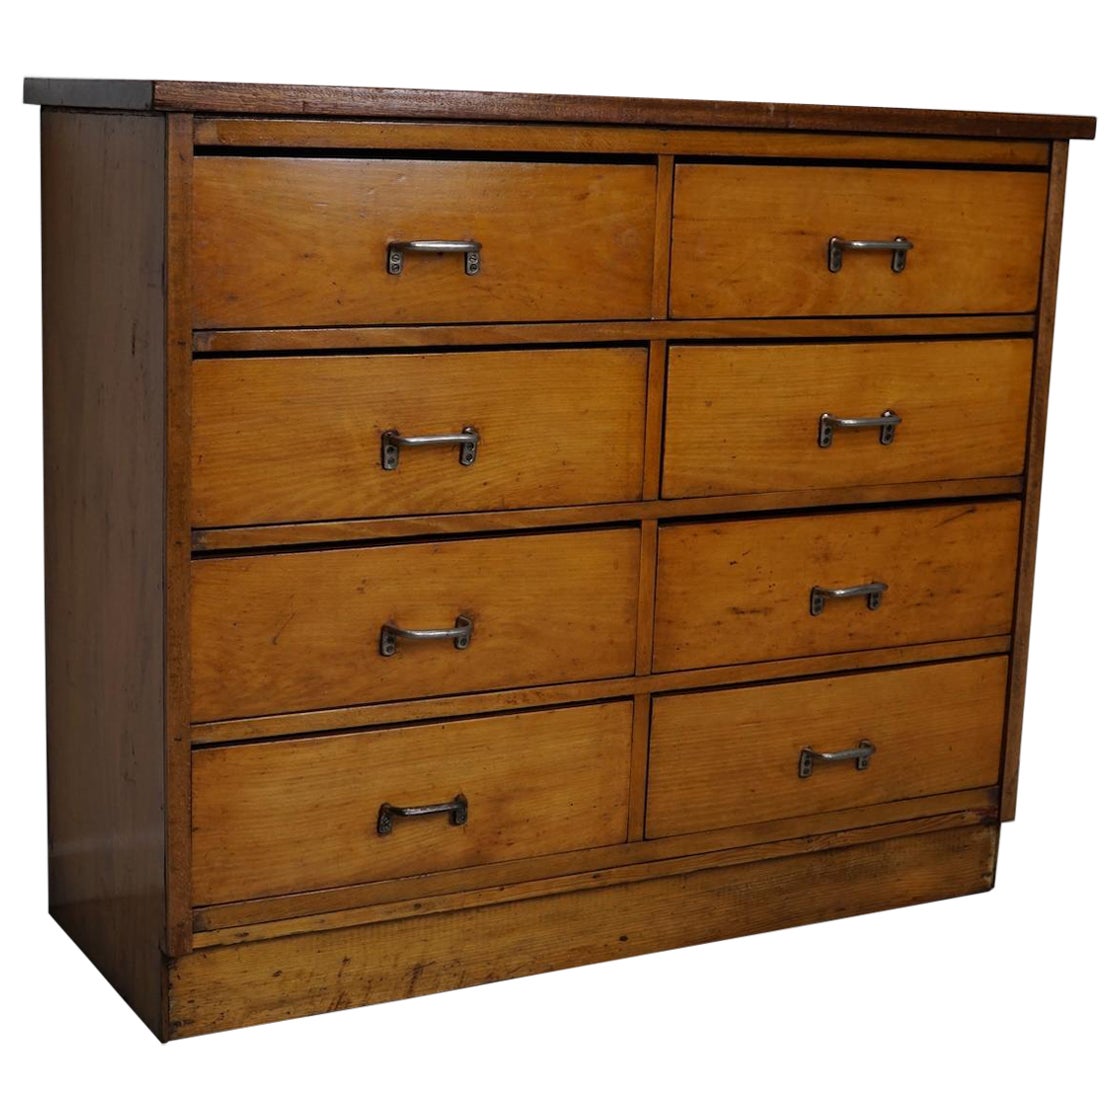 Dutch Industrial Beech Apothecary Cabinet, Mid-20th Century For Sale